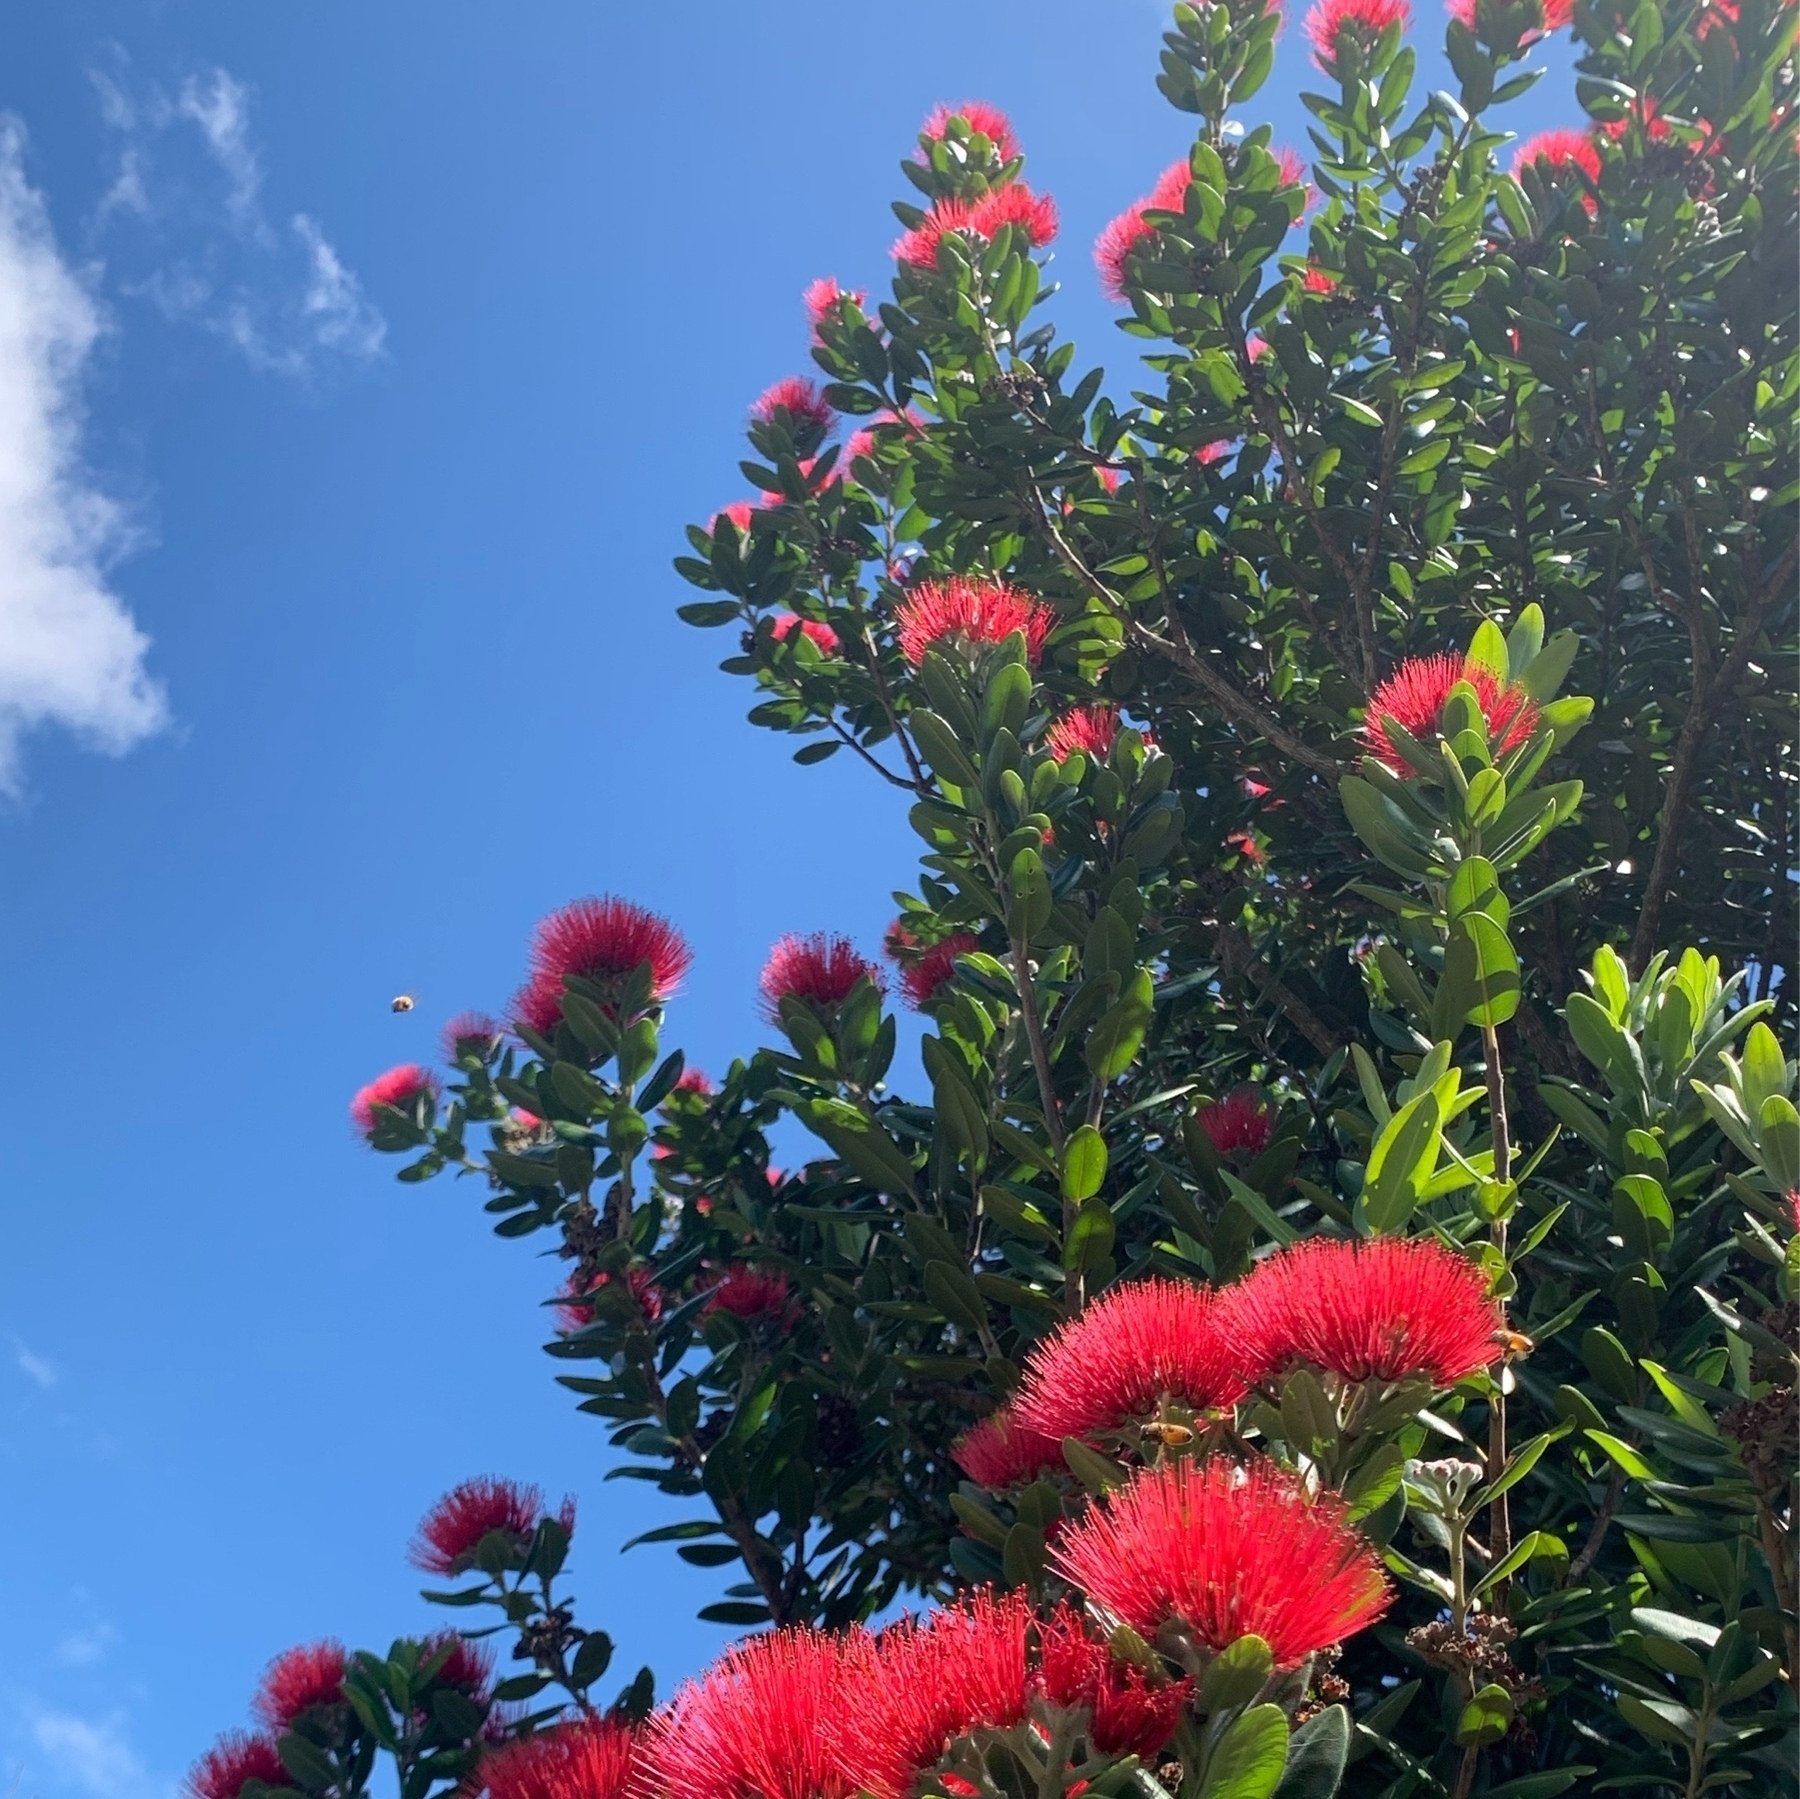 Blue sky in the background, red and green pohutukawa in the foreground